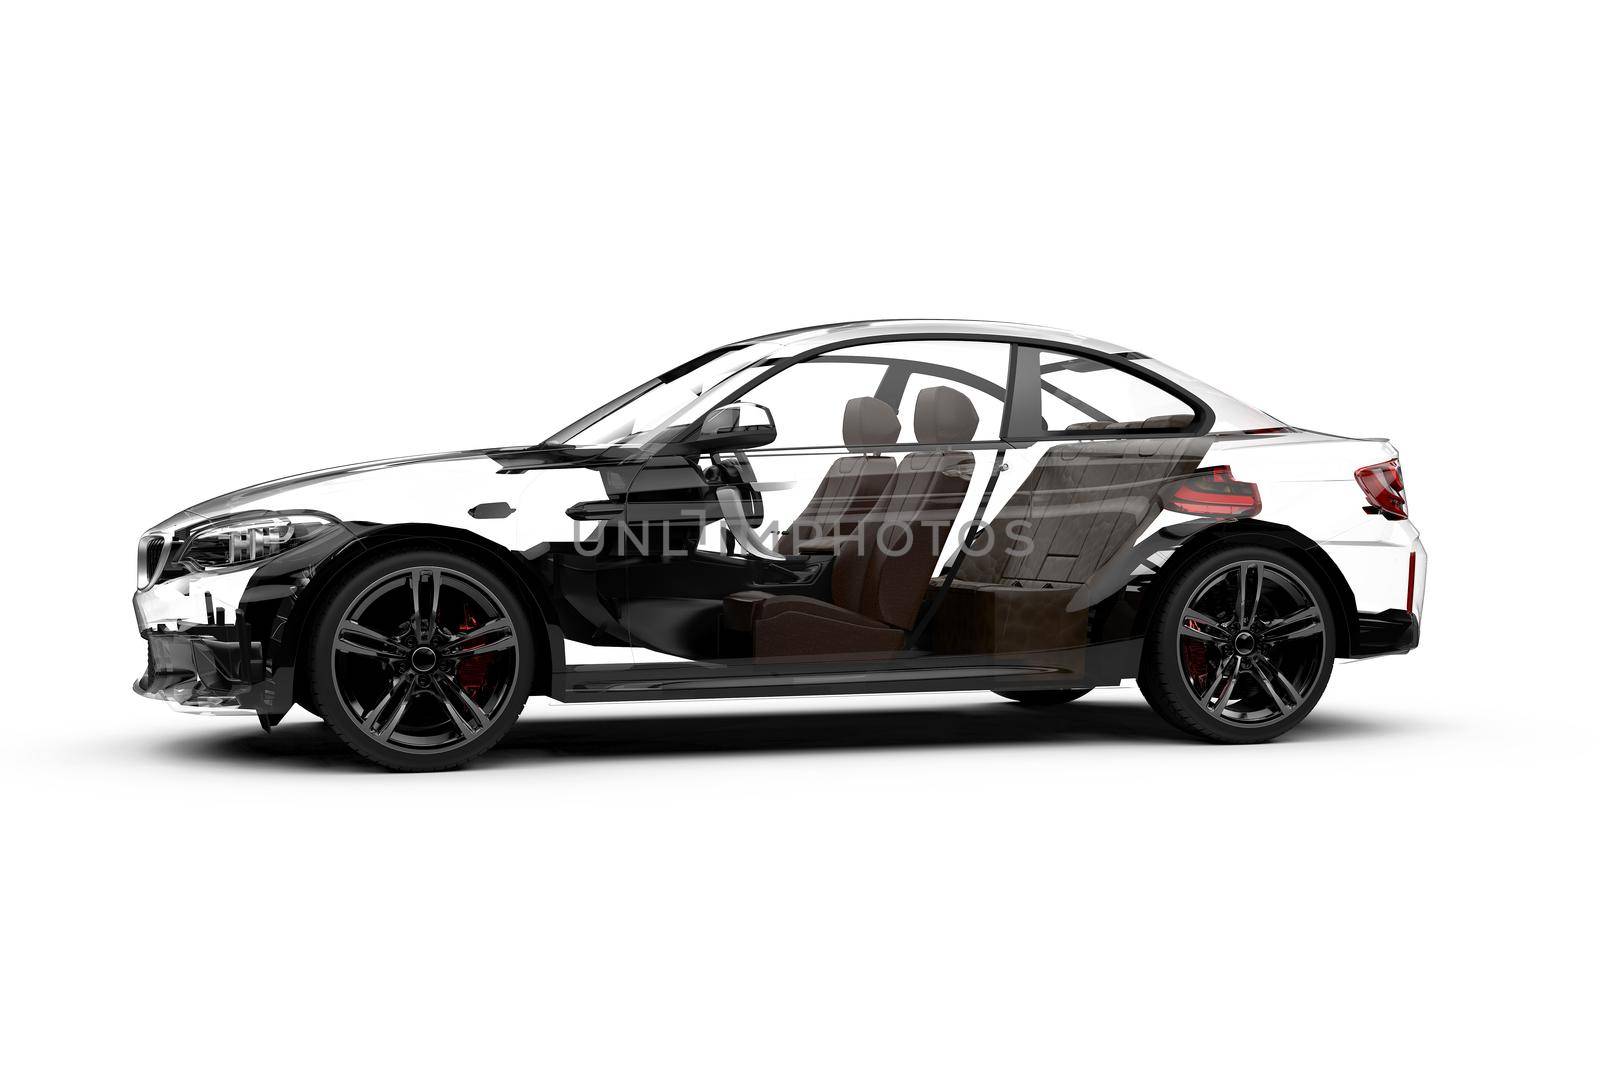 Lateral transparent car on a white background: 3D rendering